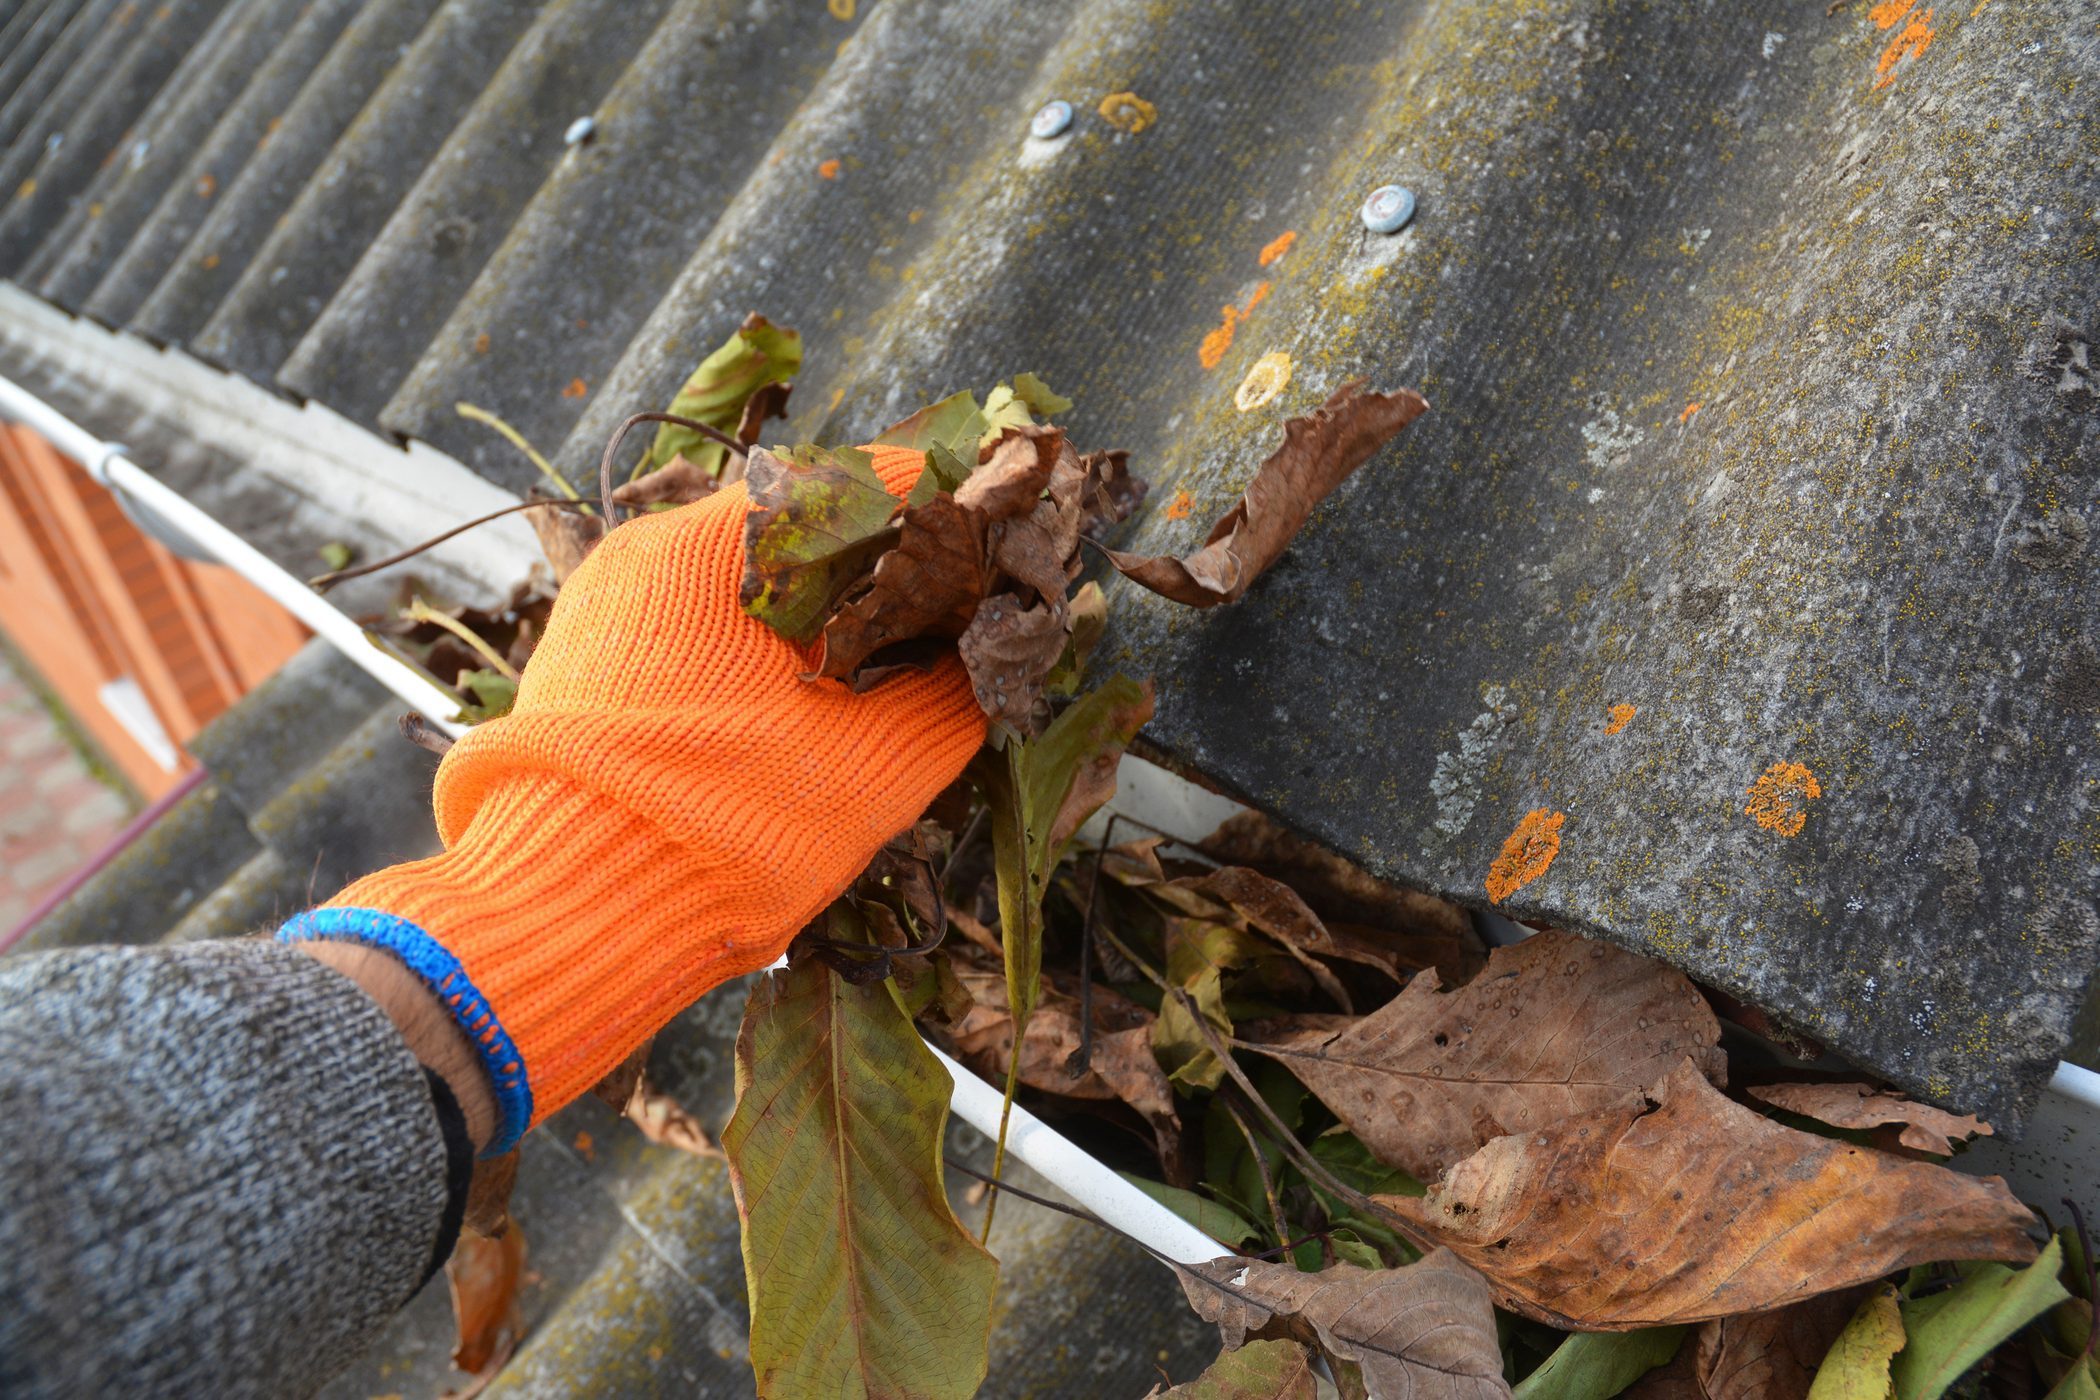 A man in gloves is cleaning a blocked rain gutter attached to the asbestos roof by removing fallen leaves, debris, dirt and moss to avoid roof gutter problems and water damage.